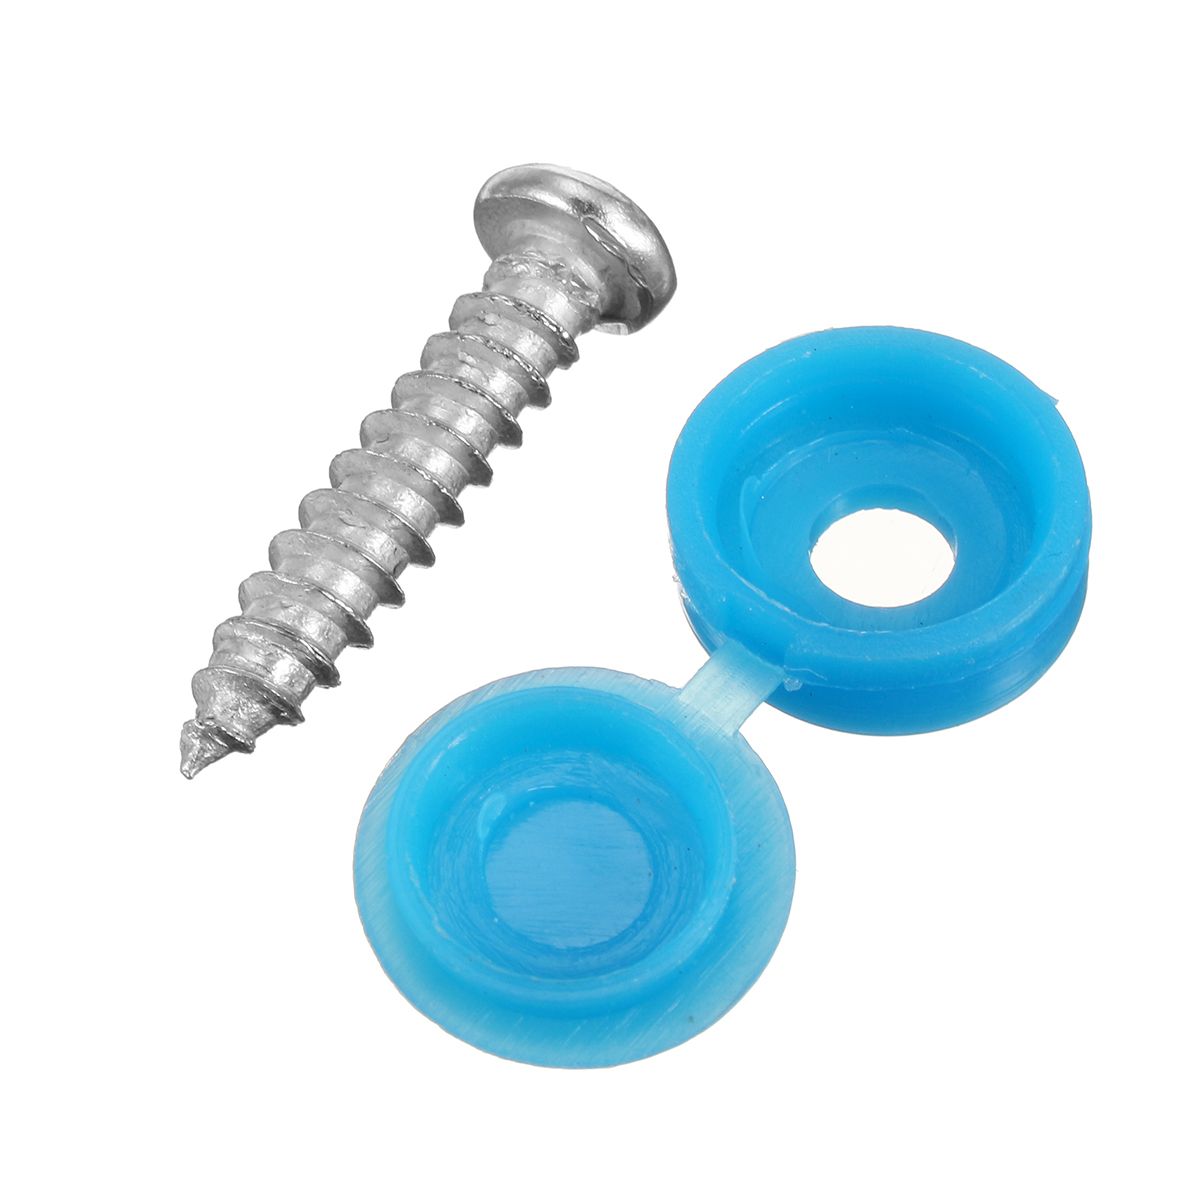 16Pcs-Licence-Number-Plate-Phillips-Self-Tapping-Screw-with-Hinged-Blue-Cover-Caps-1200608